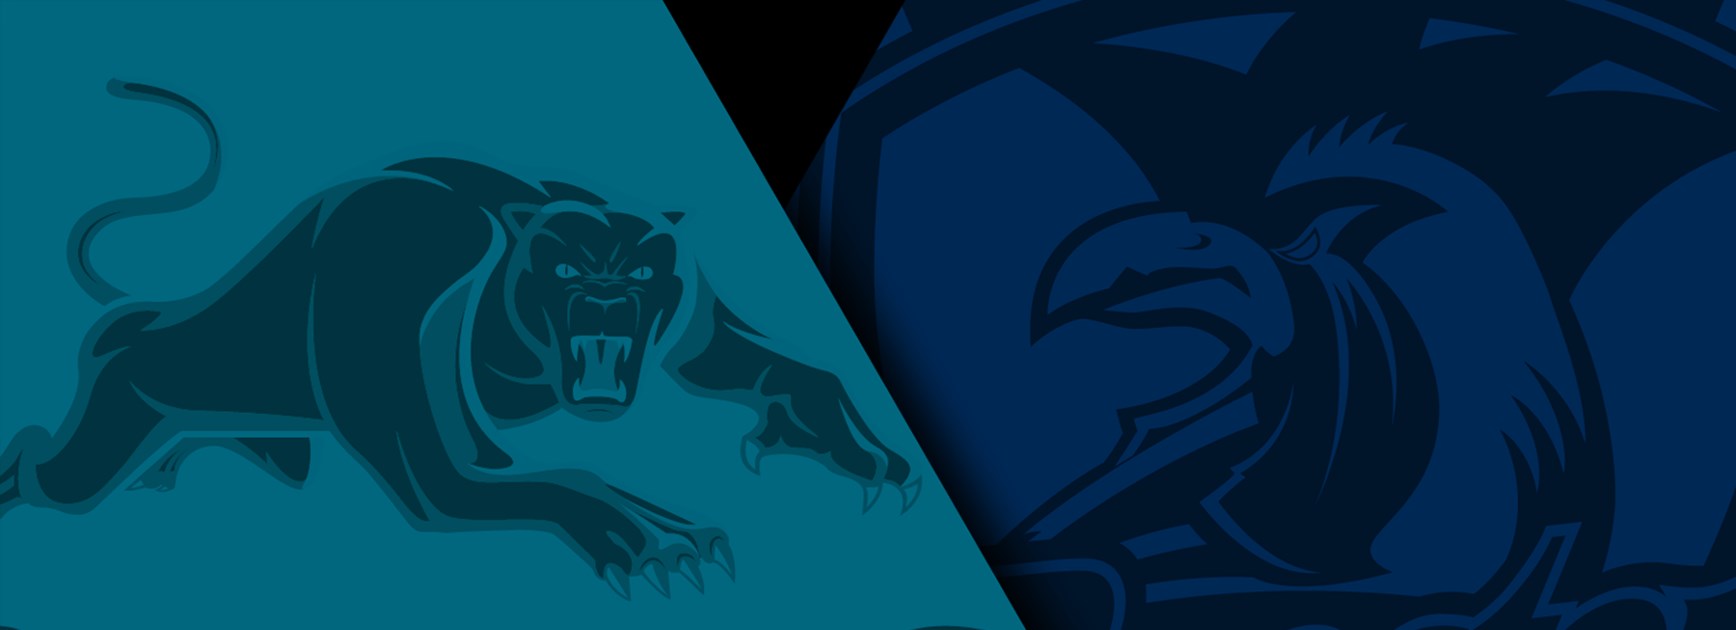 The Panthers will take on the Roosters in the 2016 Holden Cup Grand Final.